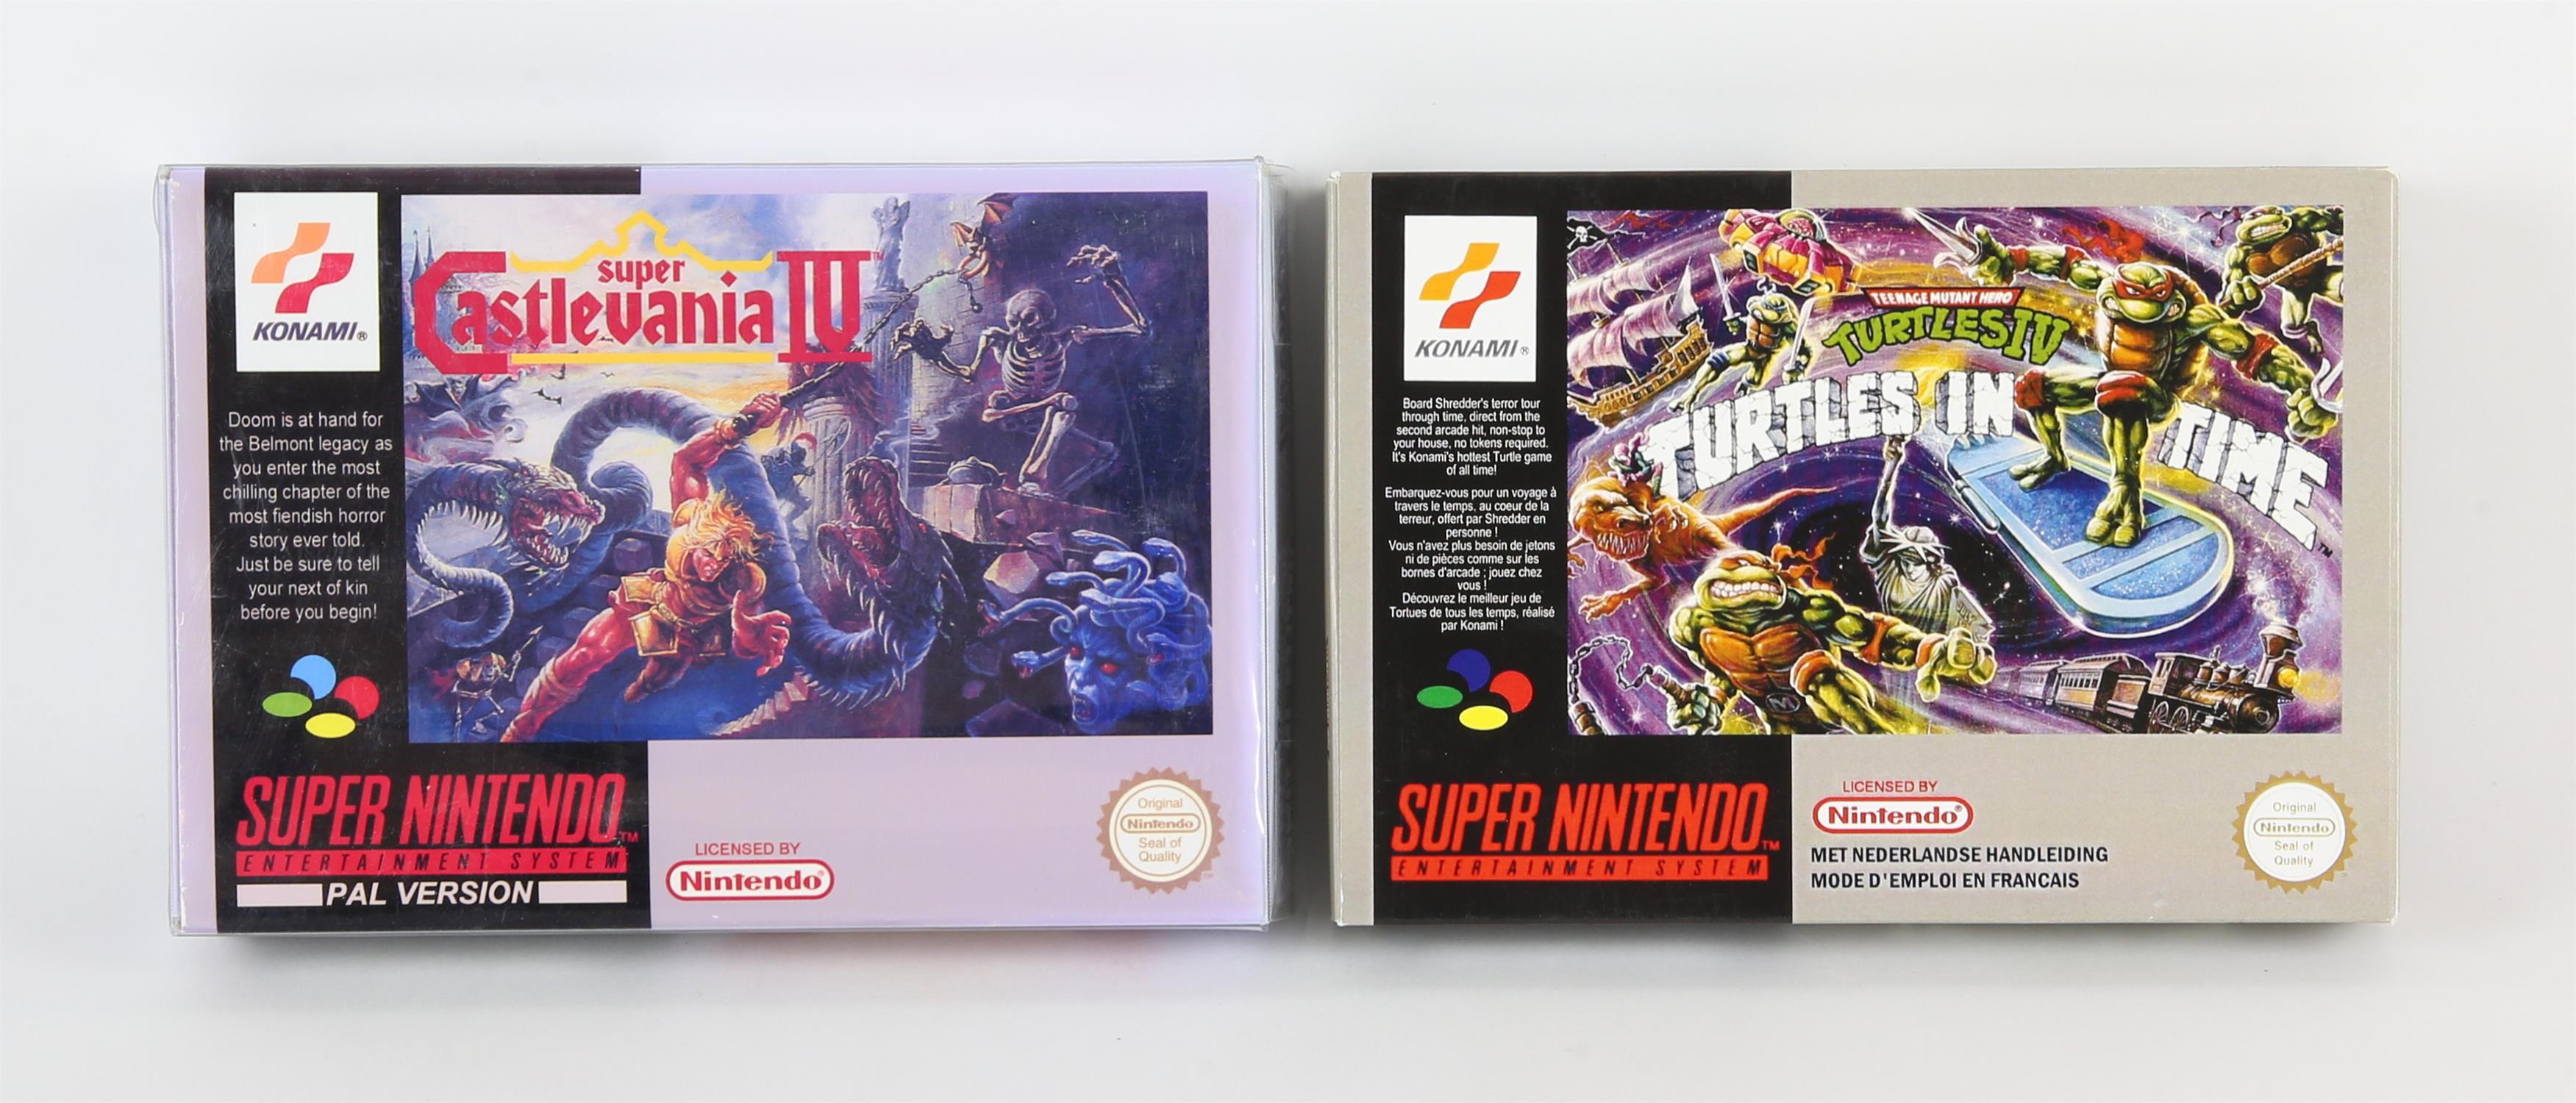 Super Nintendo SNES games x 2. Turtles in Time and Castlevania IV. Both PAL versions in repro boxes